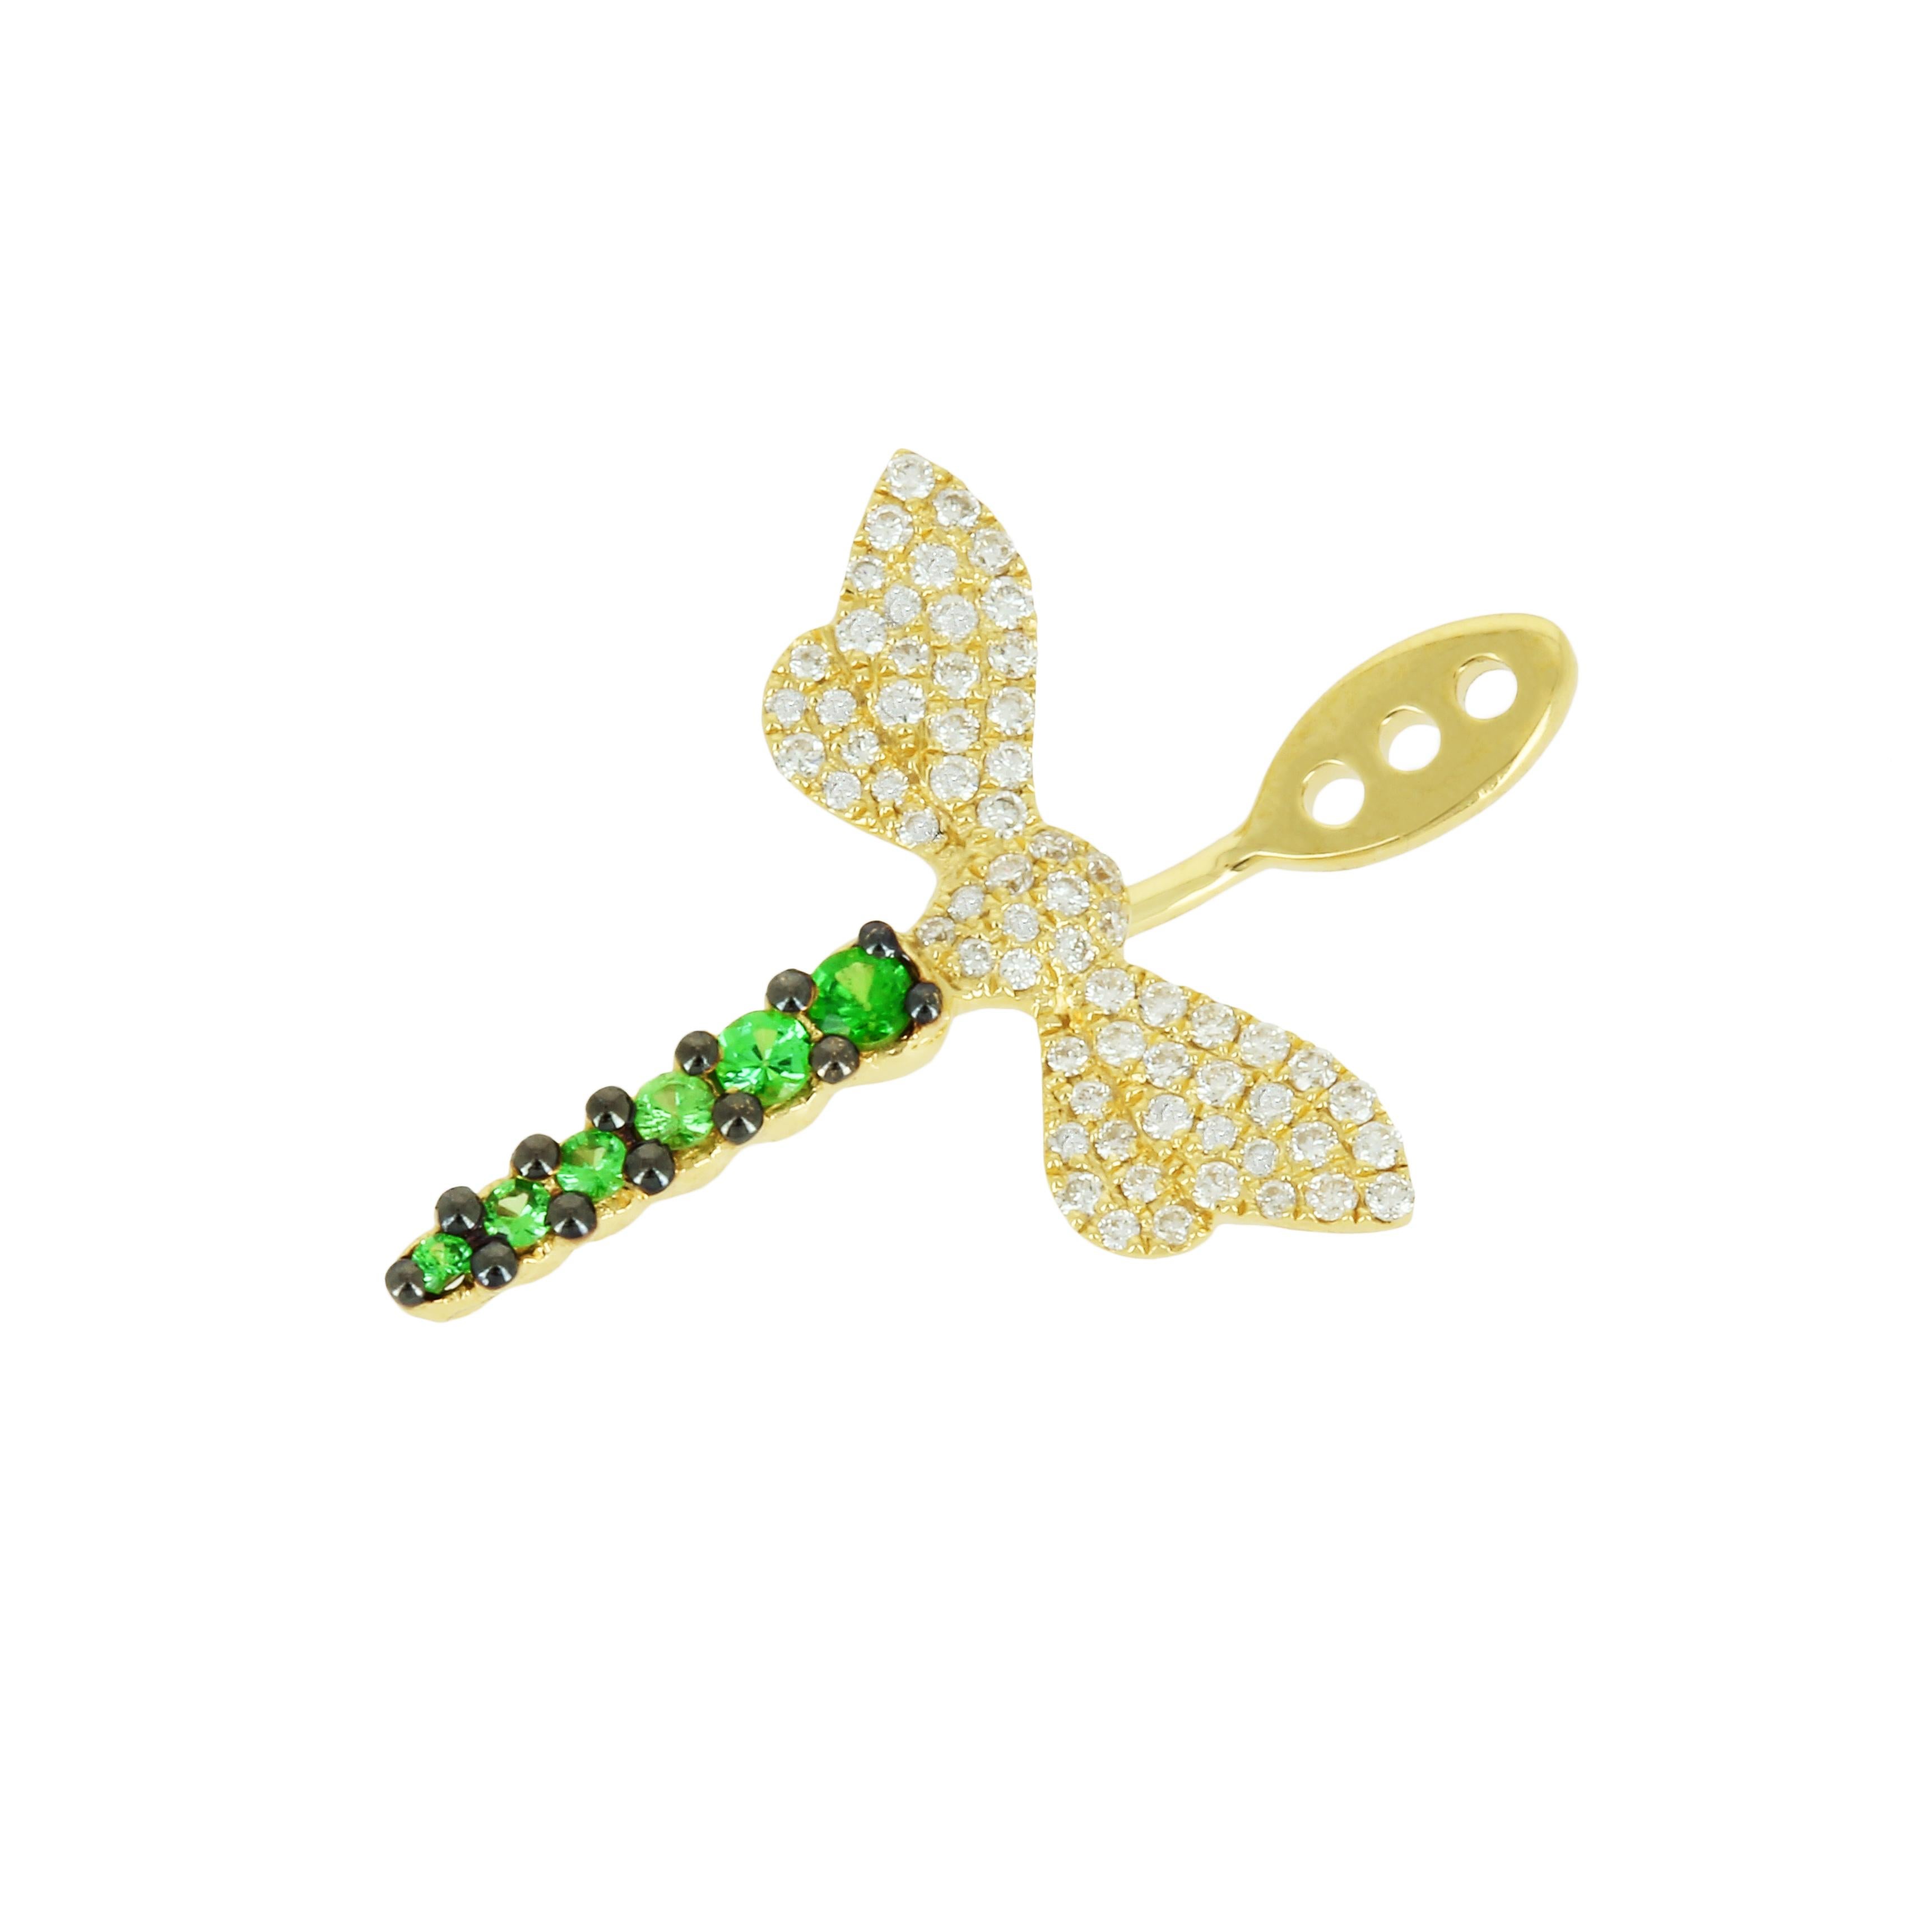 Yvonne Leon's Pair of Dragonfly Earrings in Diamonds and Tsavorites In New Condition For Sale In Paris, FR